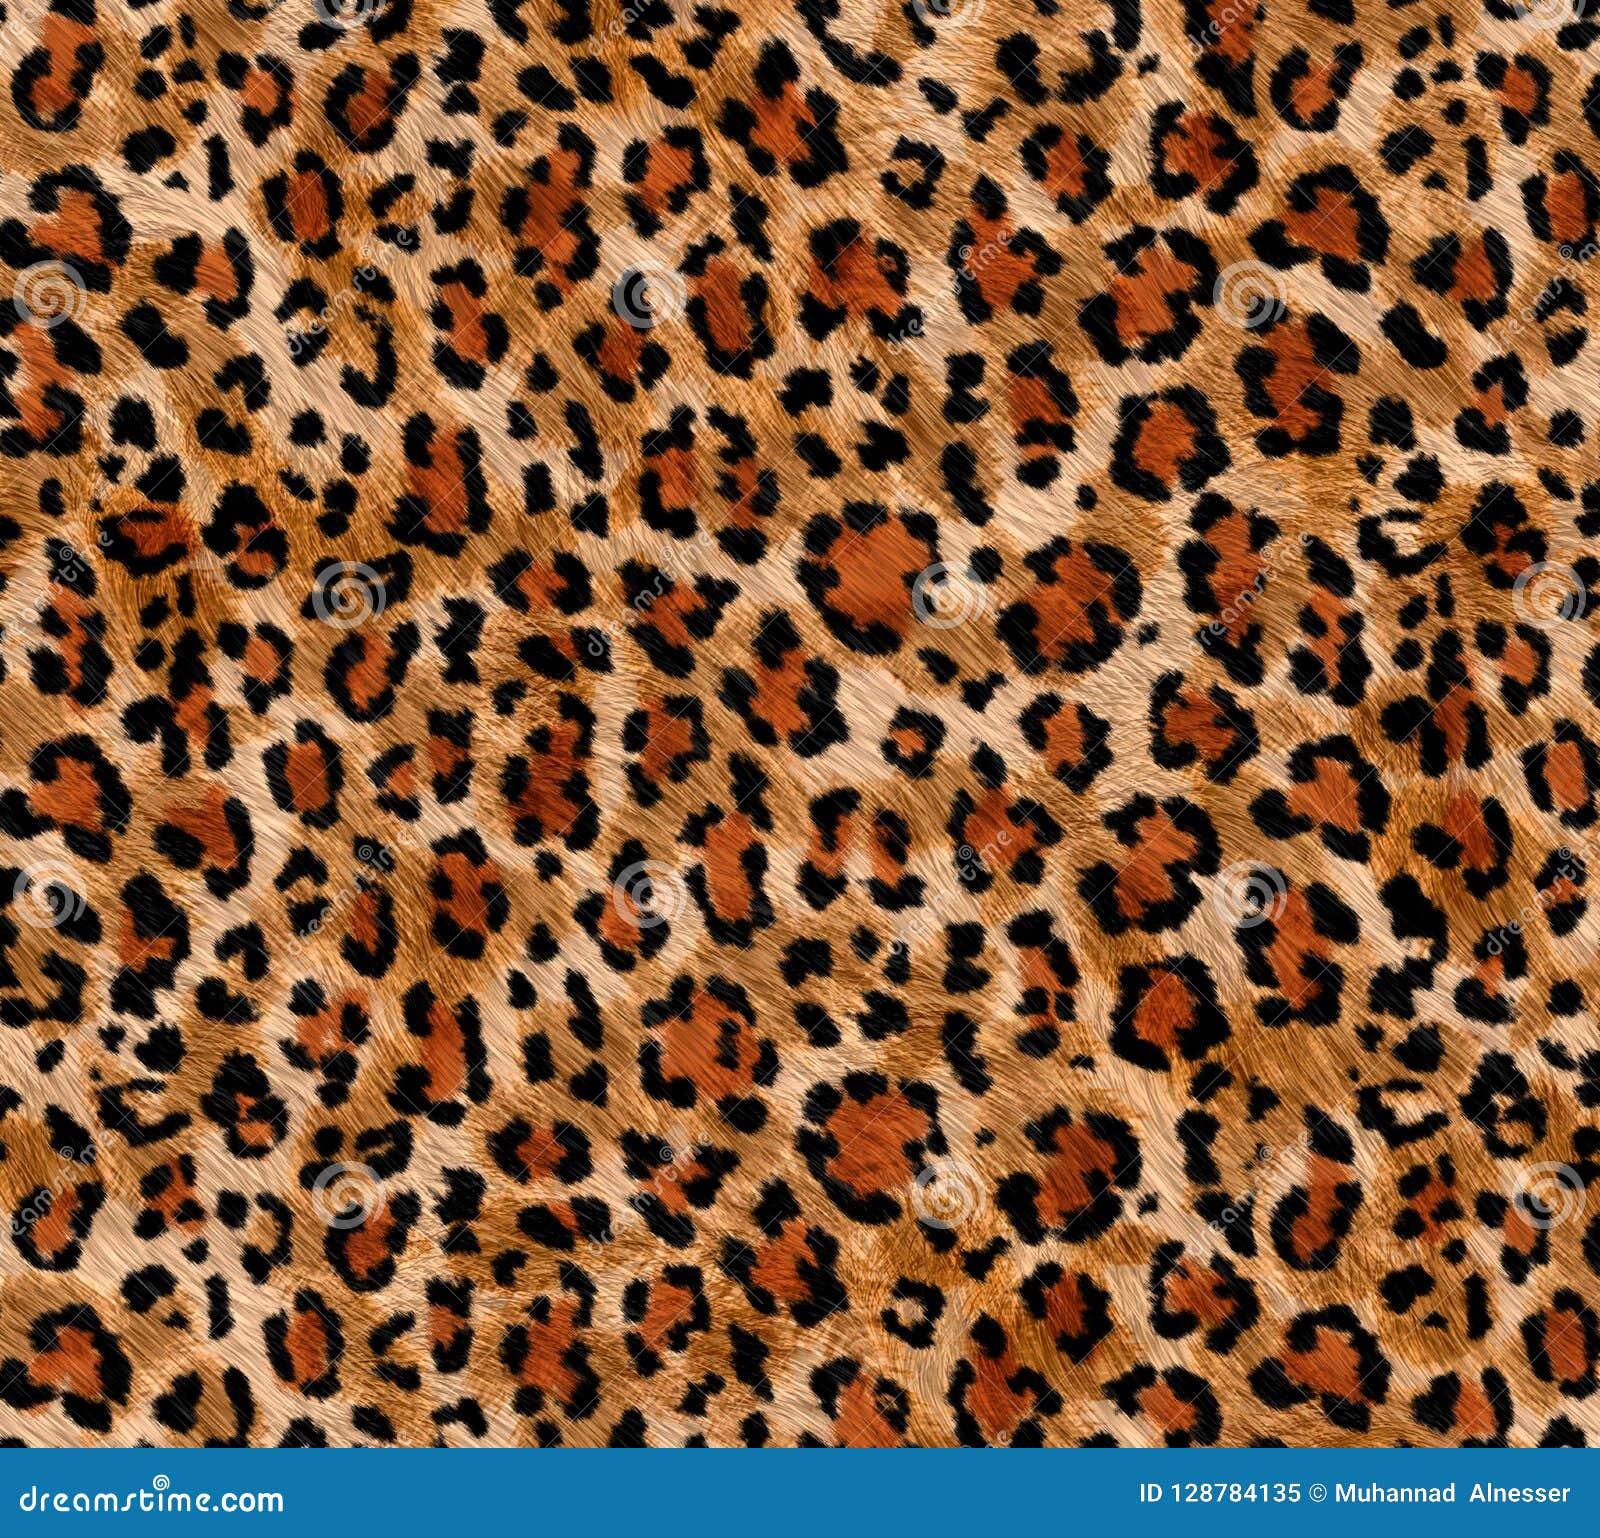 seamless abstract pattern on a skin leopard texture, snake.